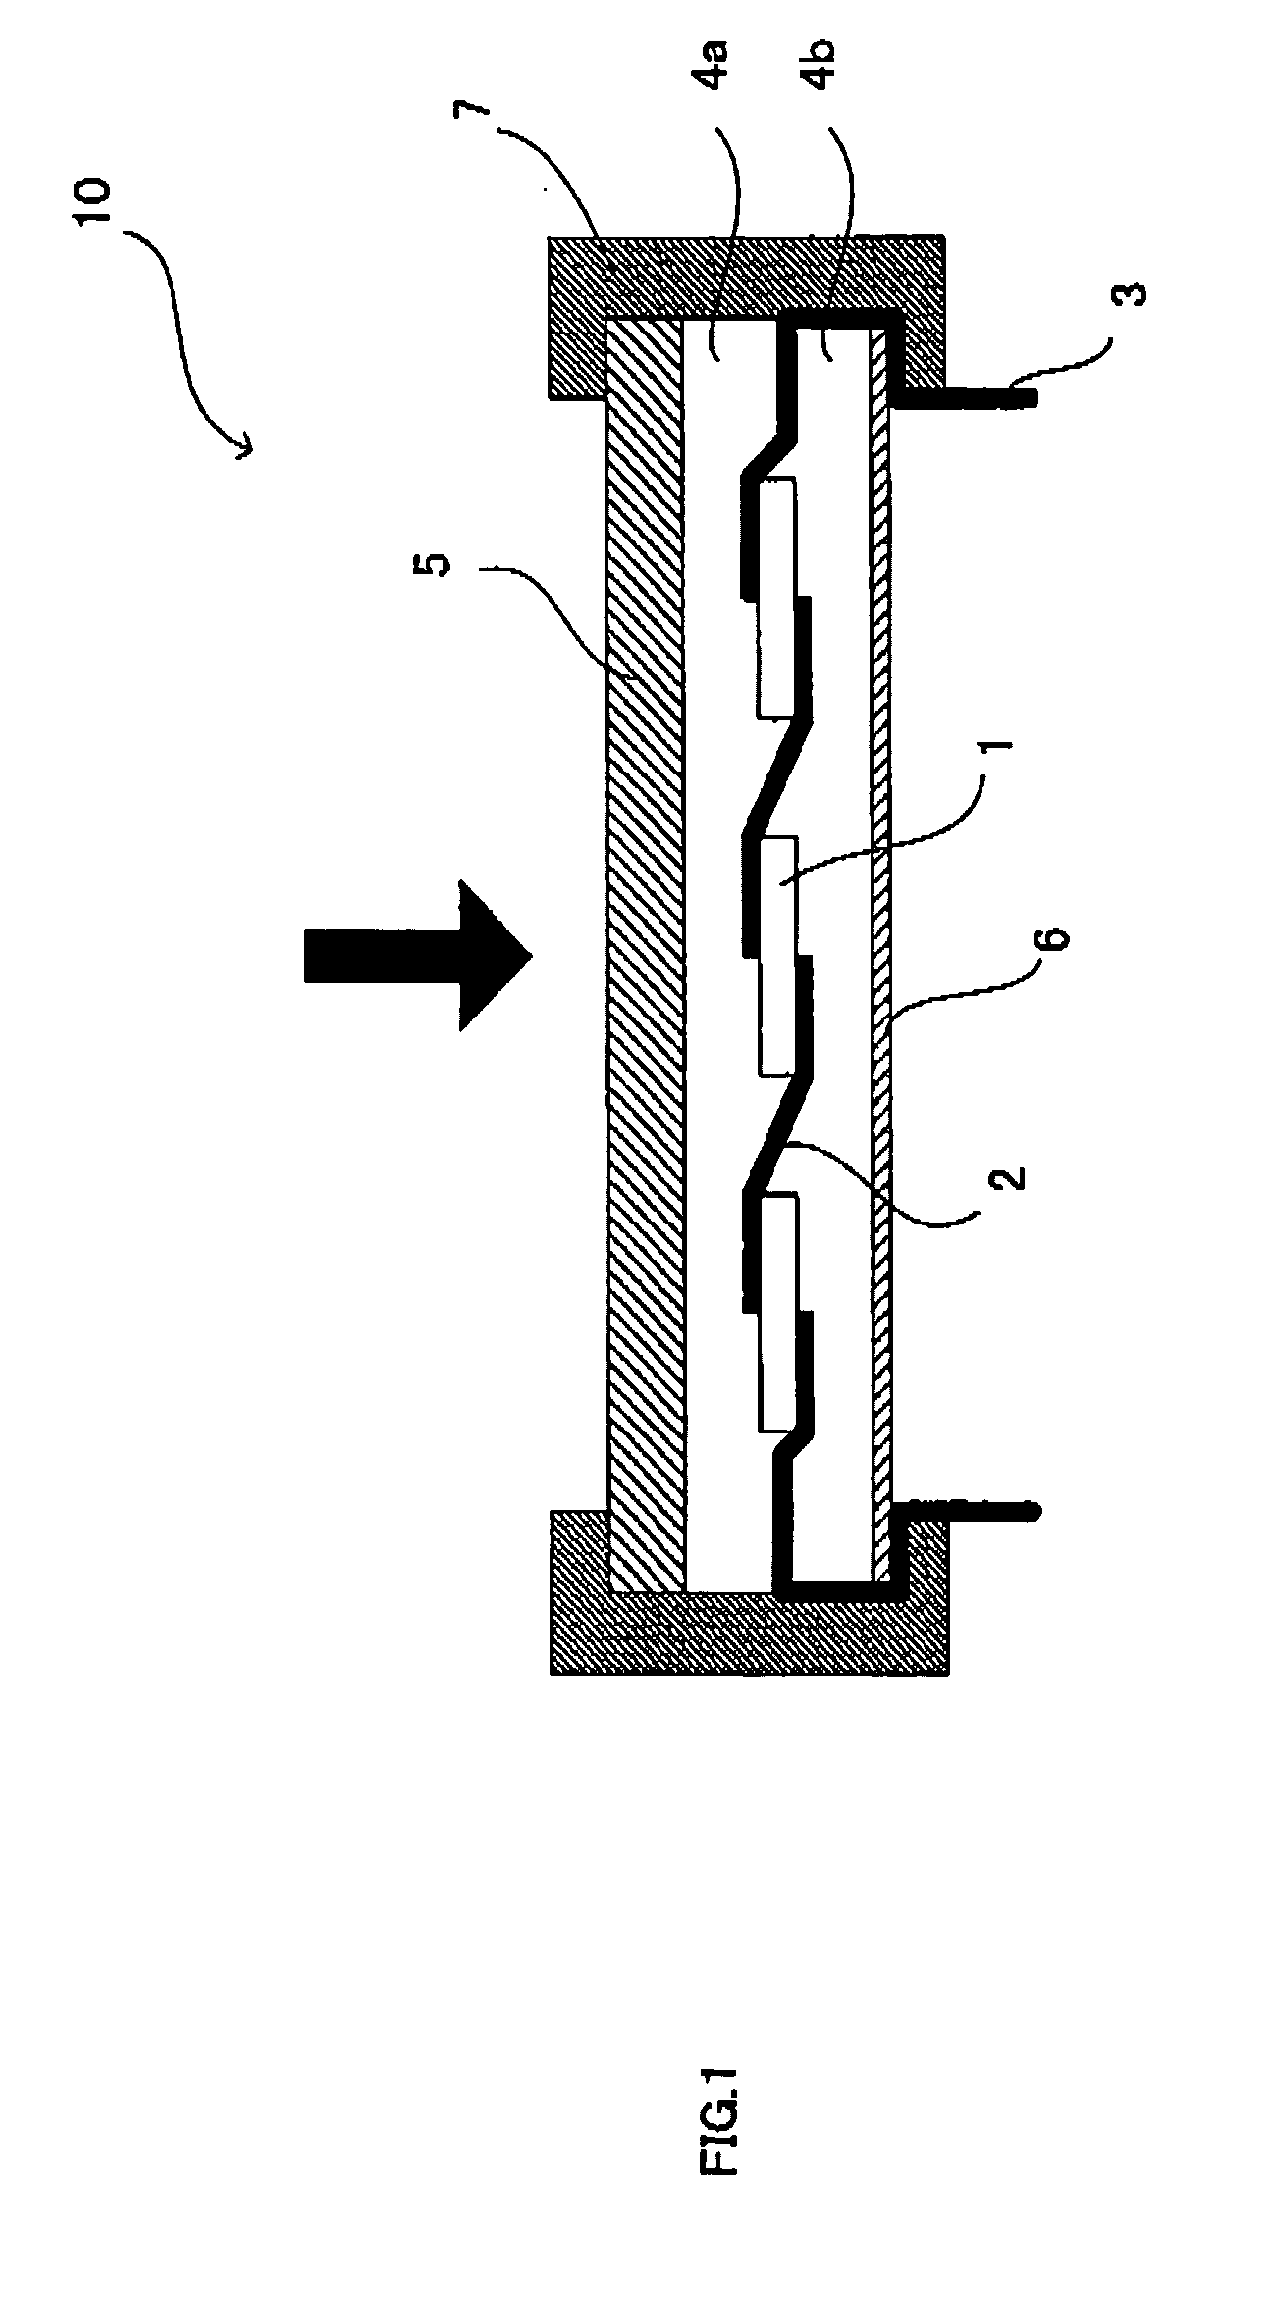 Encapsulant layer for photovoltaic module, photovoltaic module and method for manufacturing regenerated photovoltaic cell and regenerated transparent front face substrate